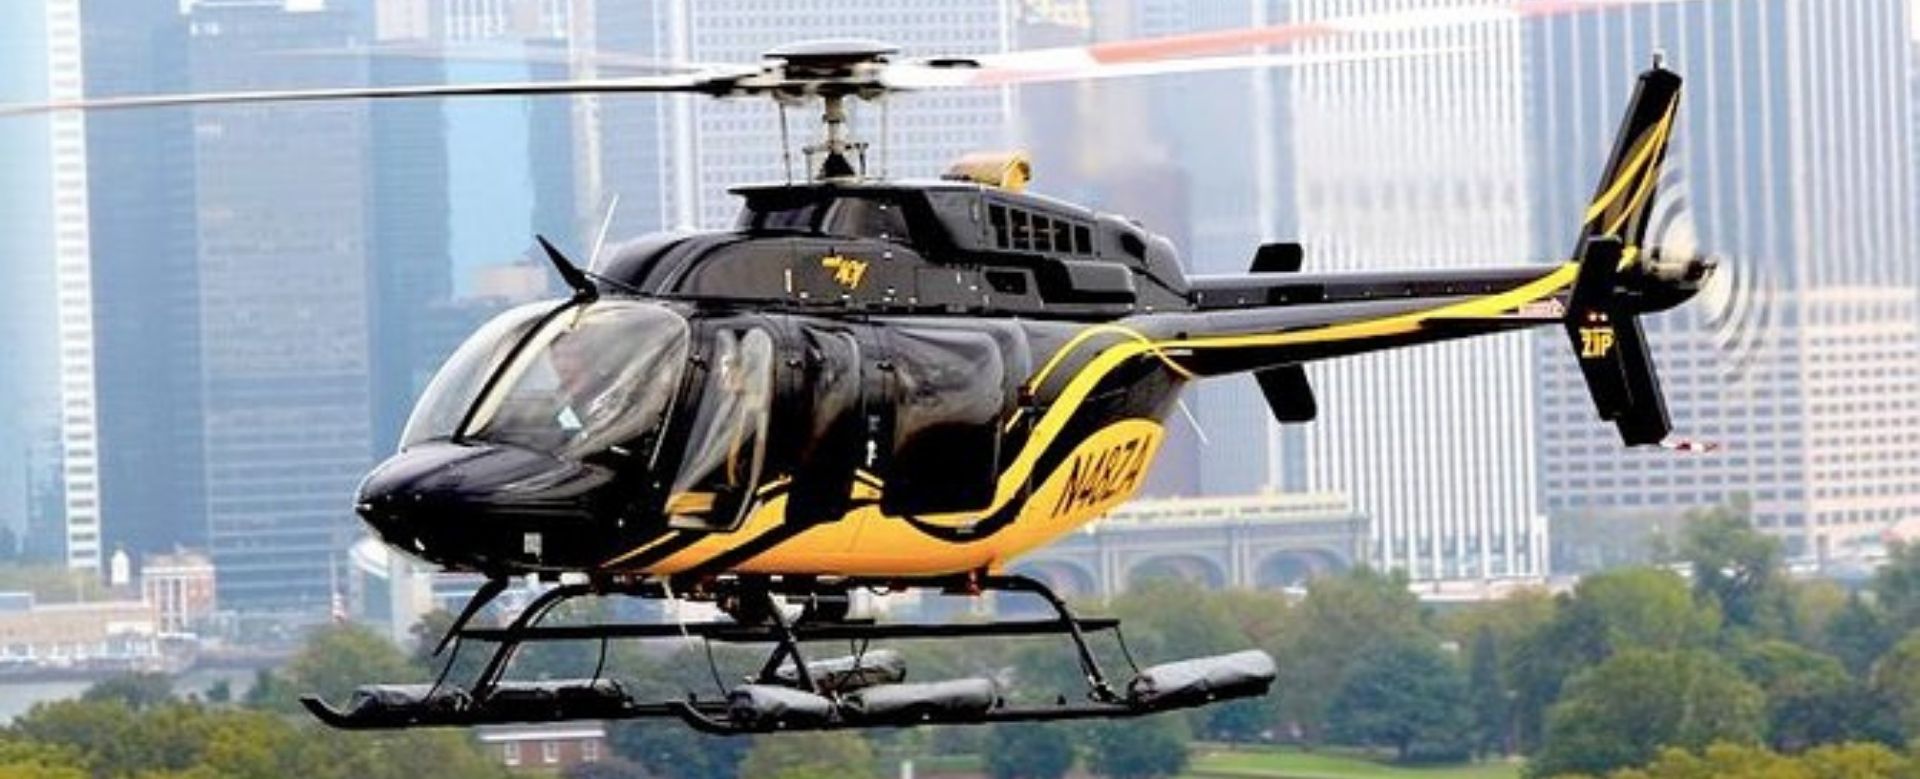 Helicopter rental malaysia price